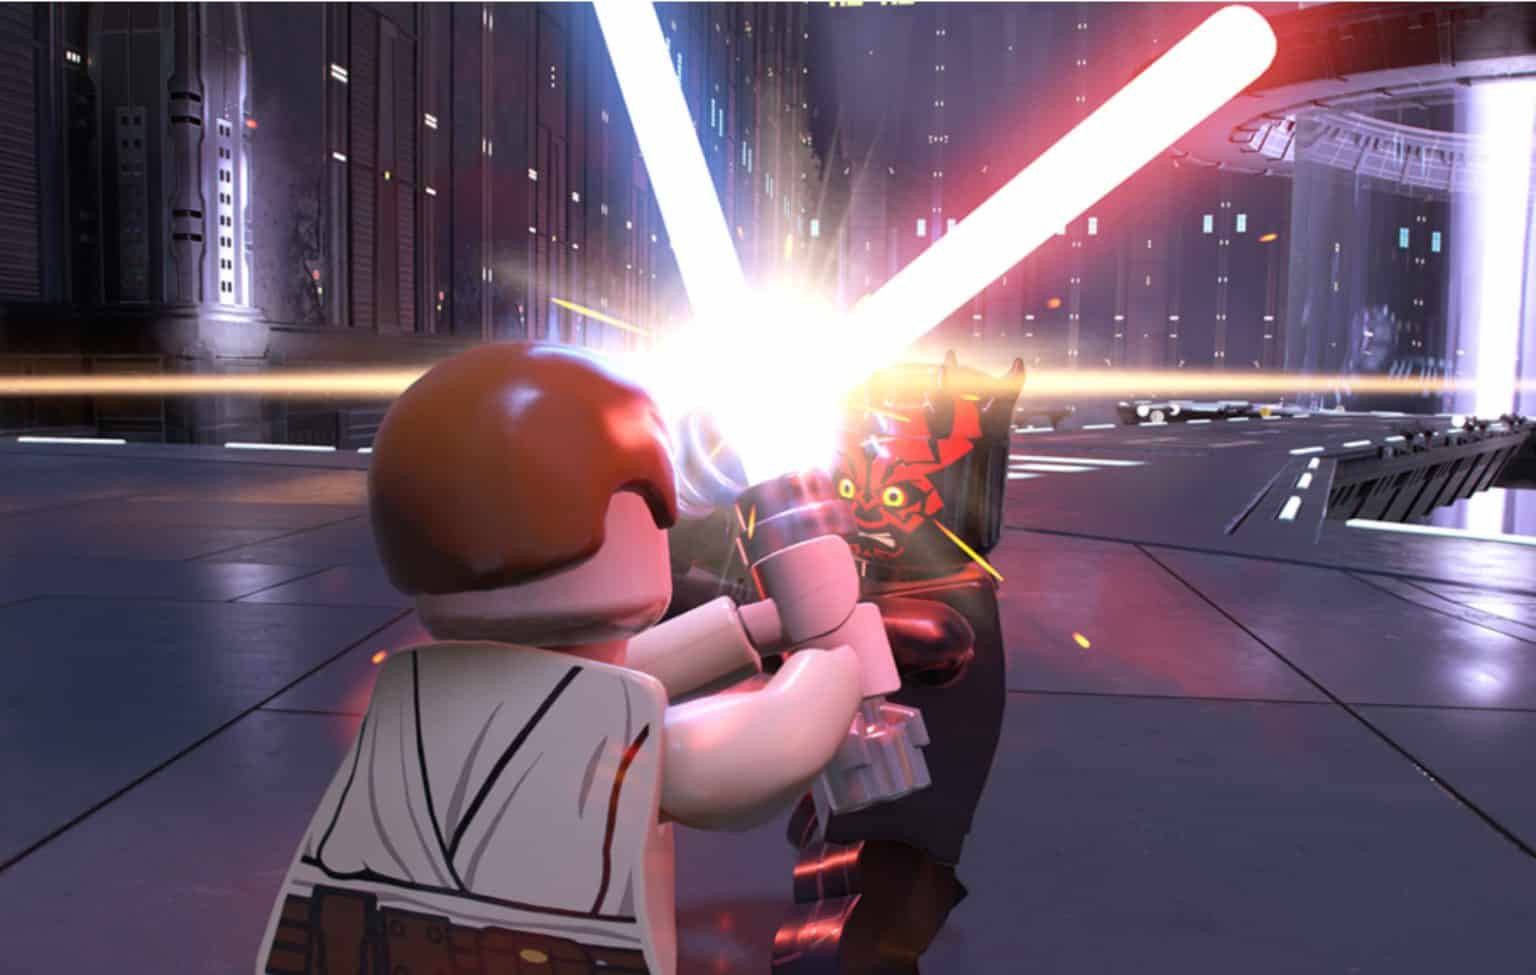 lego star wars ps5 download